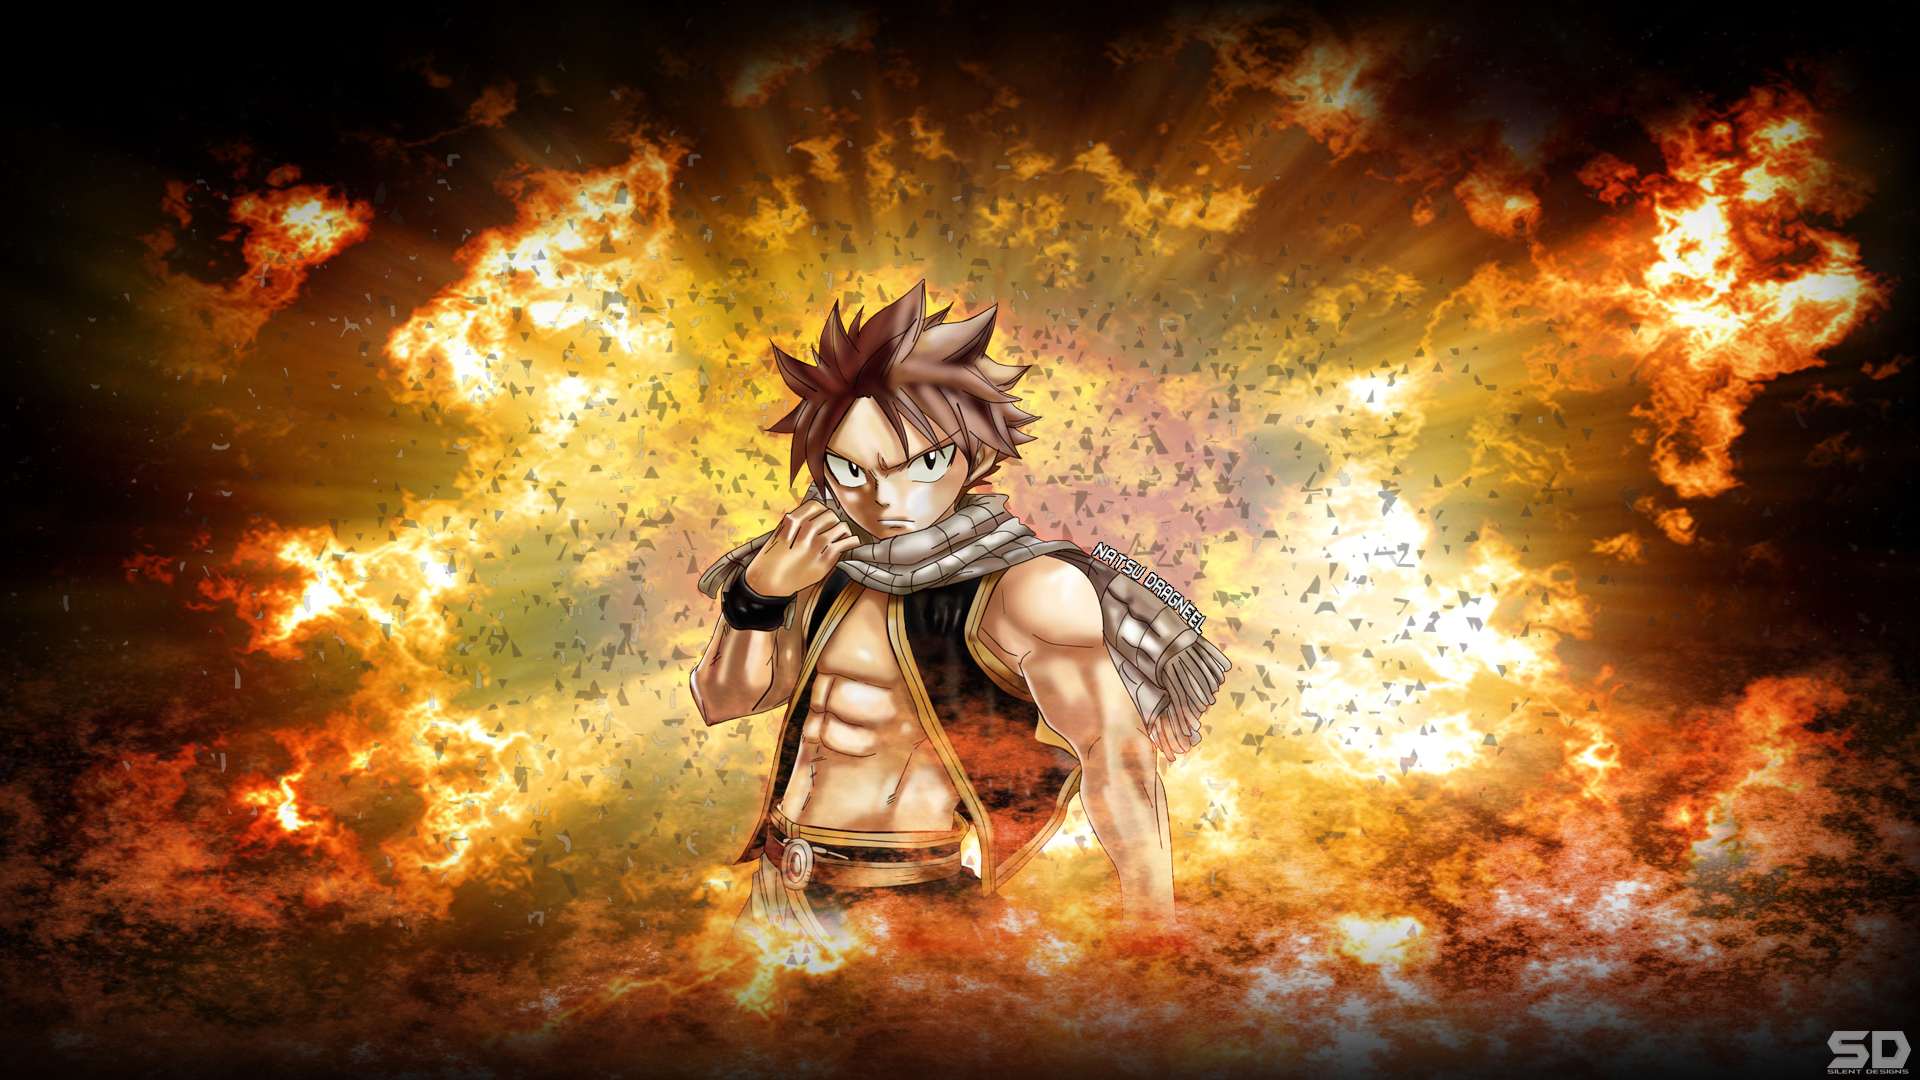 Fairy Tail Wallpaper Natsu Dragneel By Silent Designs